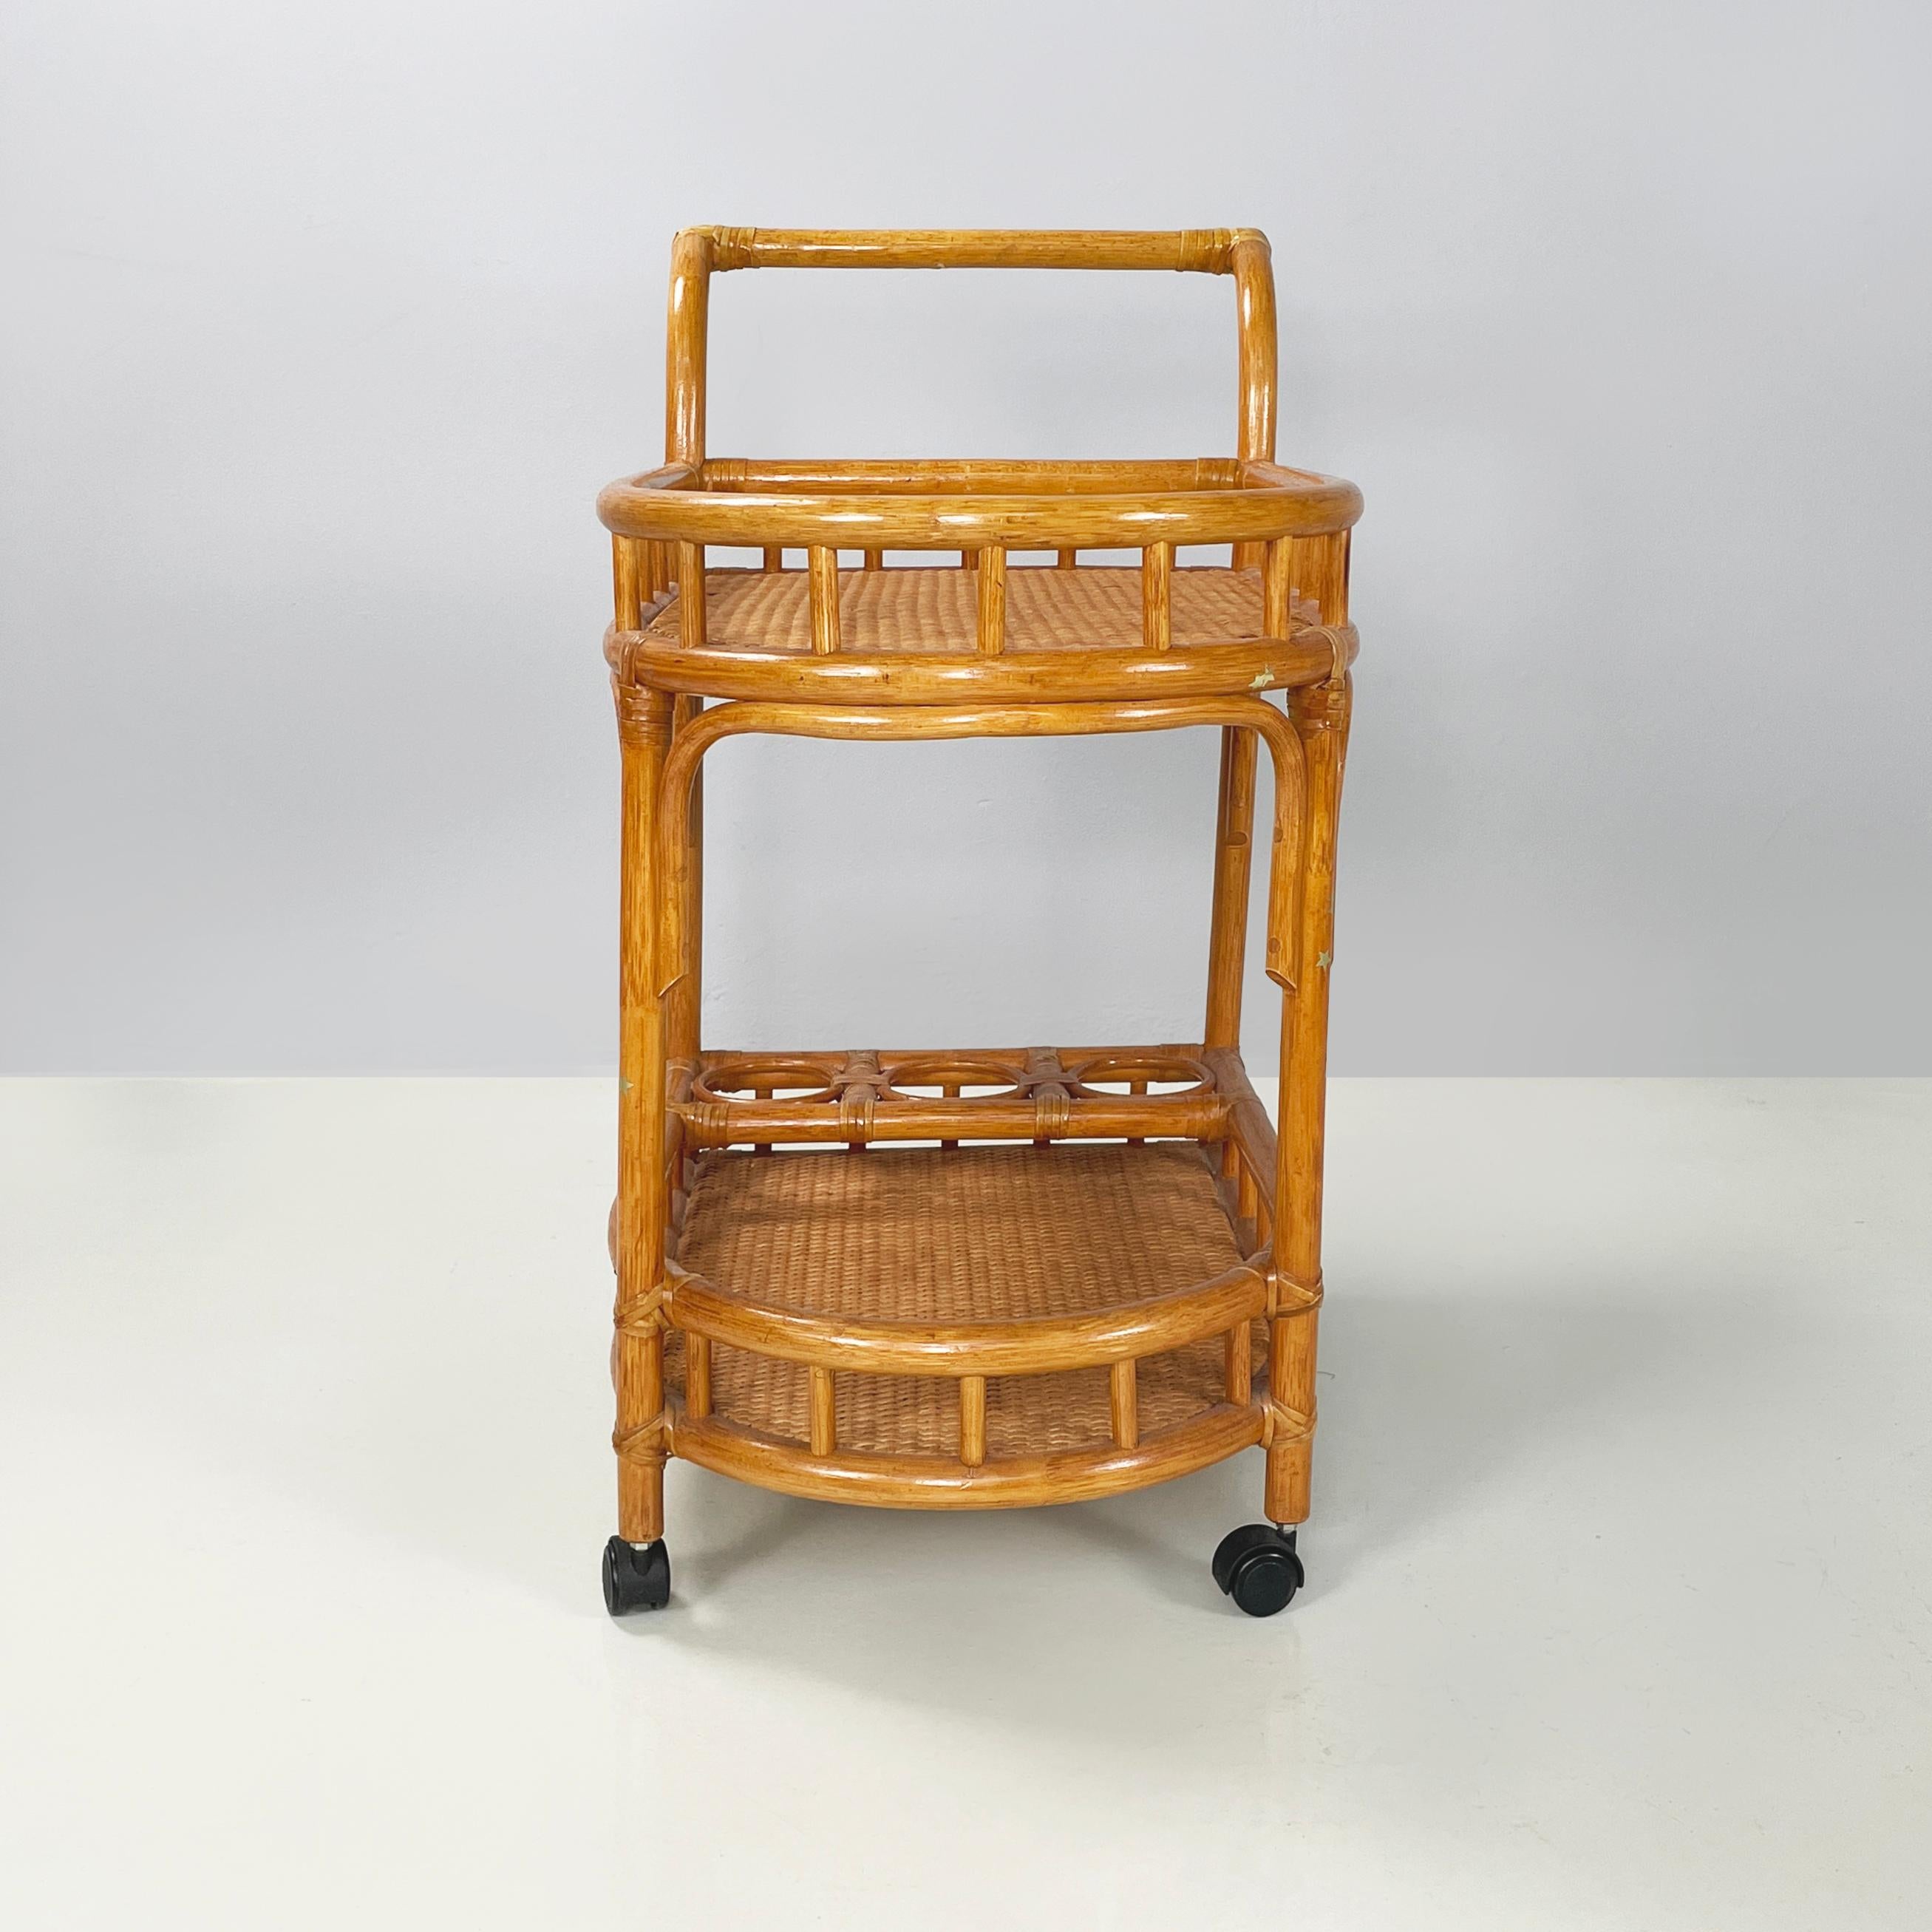 Italian mid-century modern Double-shelf and bottle holders cart in rattan bamboo, 1960s
Double-shelf food cart in rattan and curved bamboo. The two shelves have a rounded side with woven rattan interiors and bamboo profiles. On the lower level there